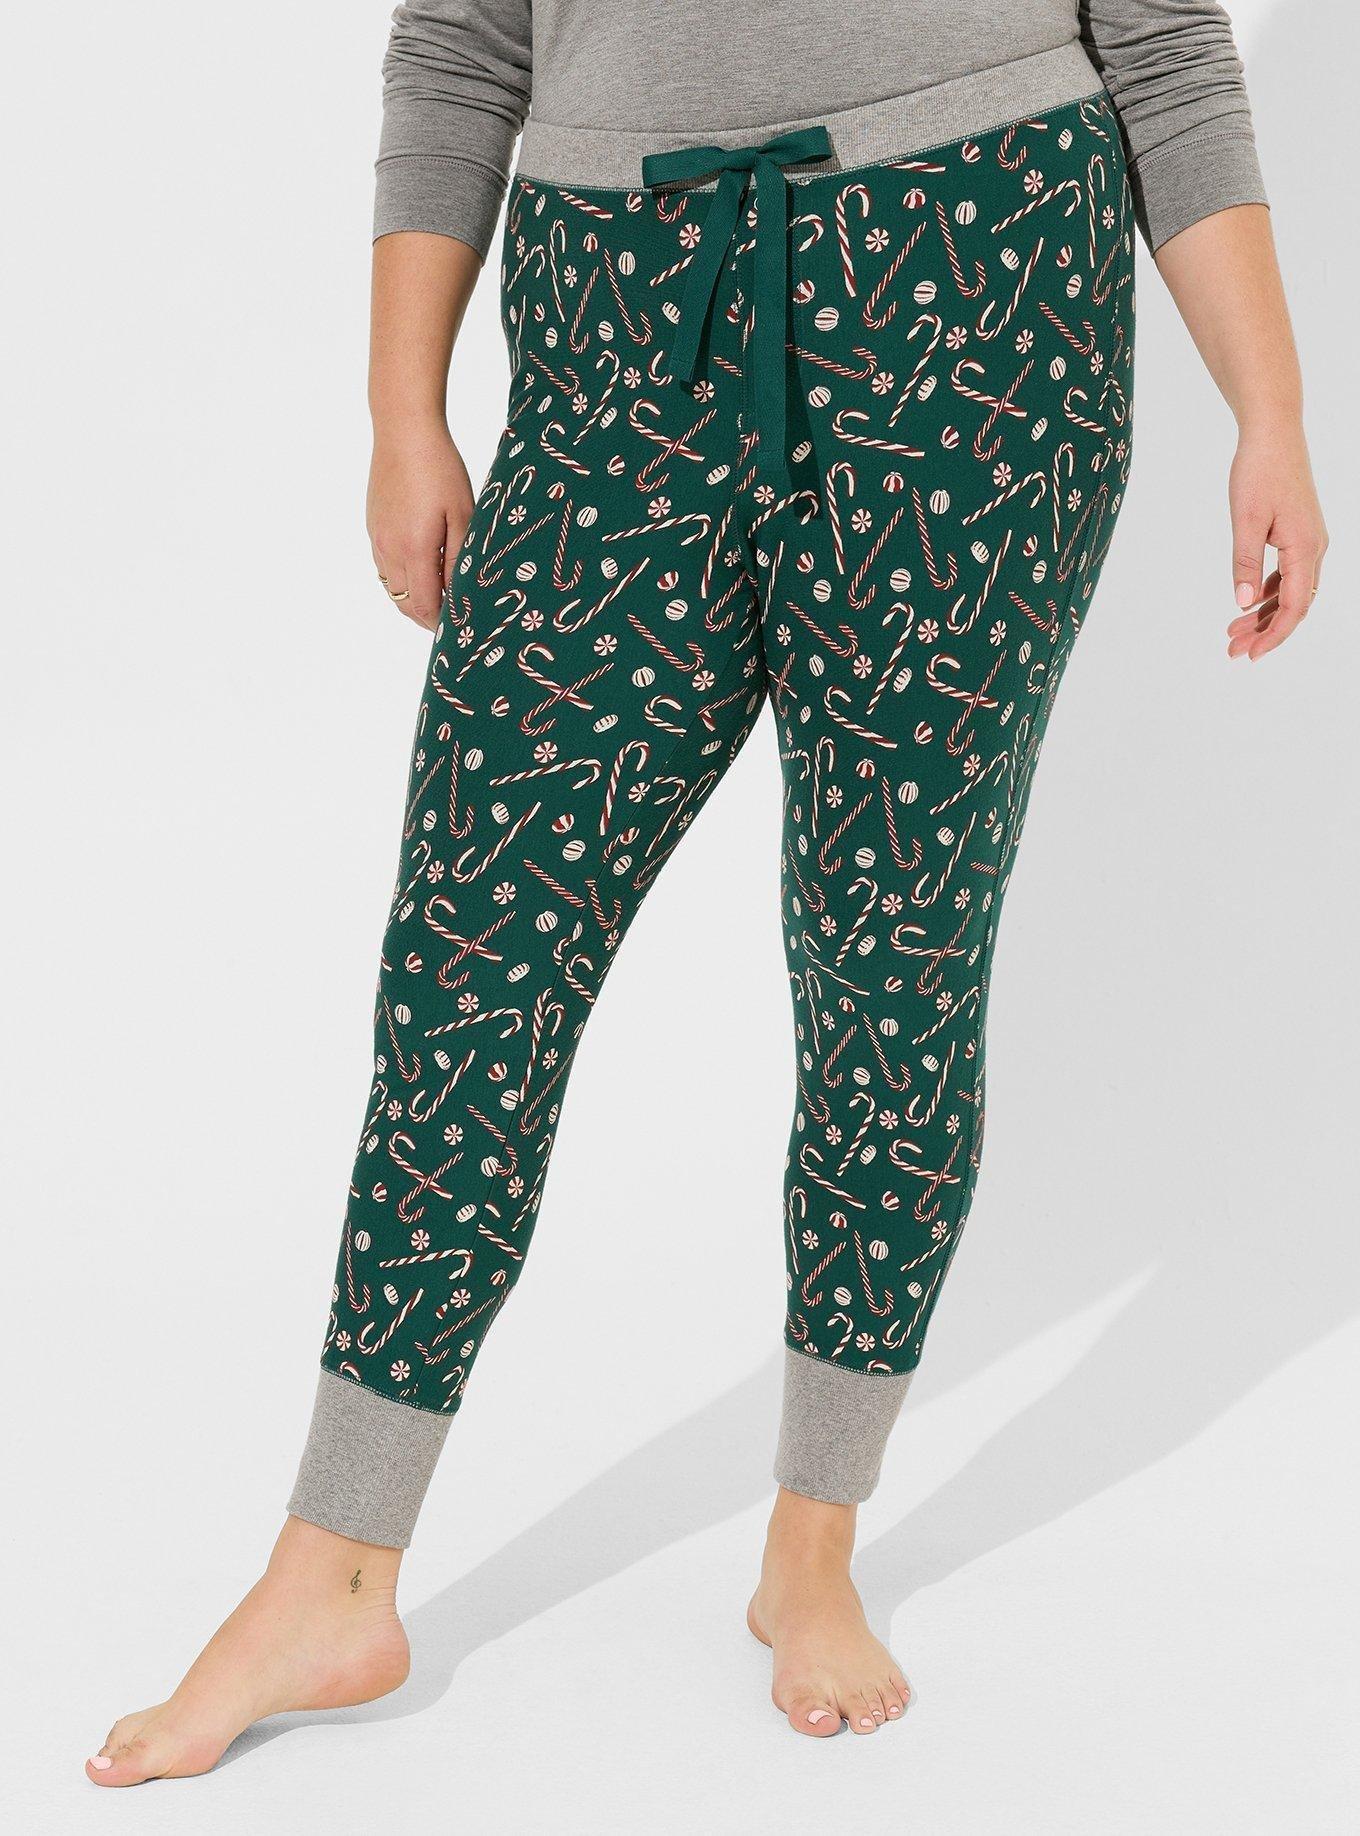 Wholesale Two Left Feet Holiday Leggings - Treemendous - Large and